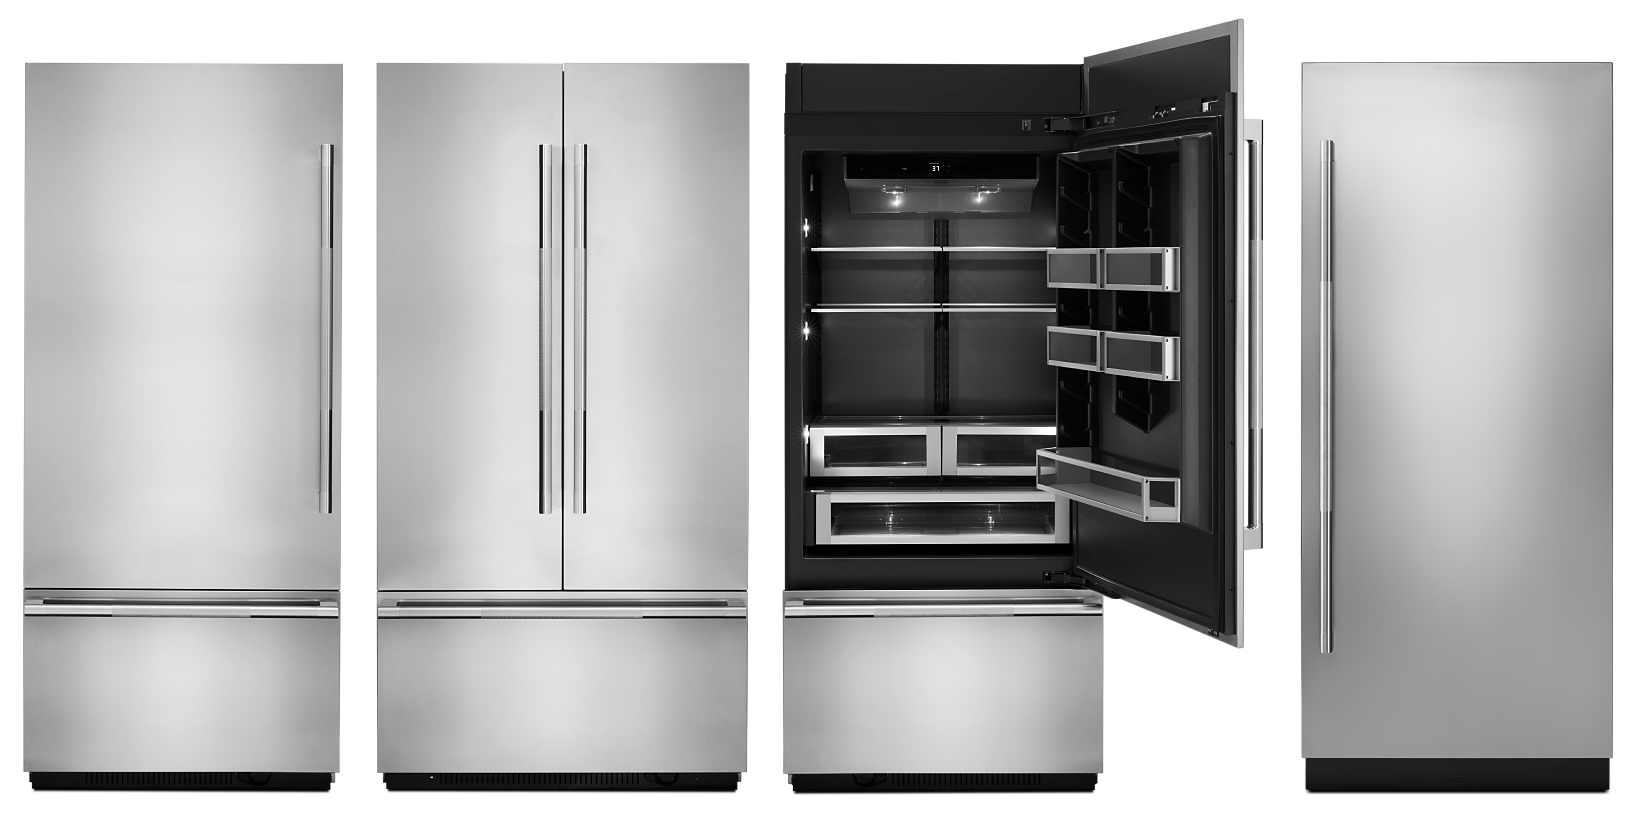  The different configurations of JennAir professional-style refrigerators. 